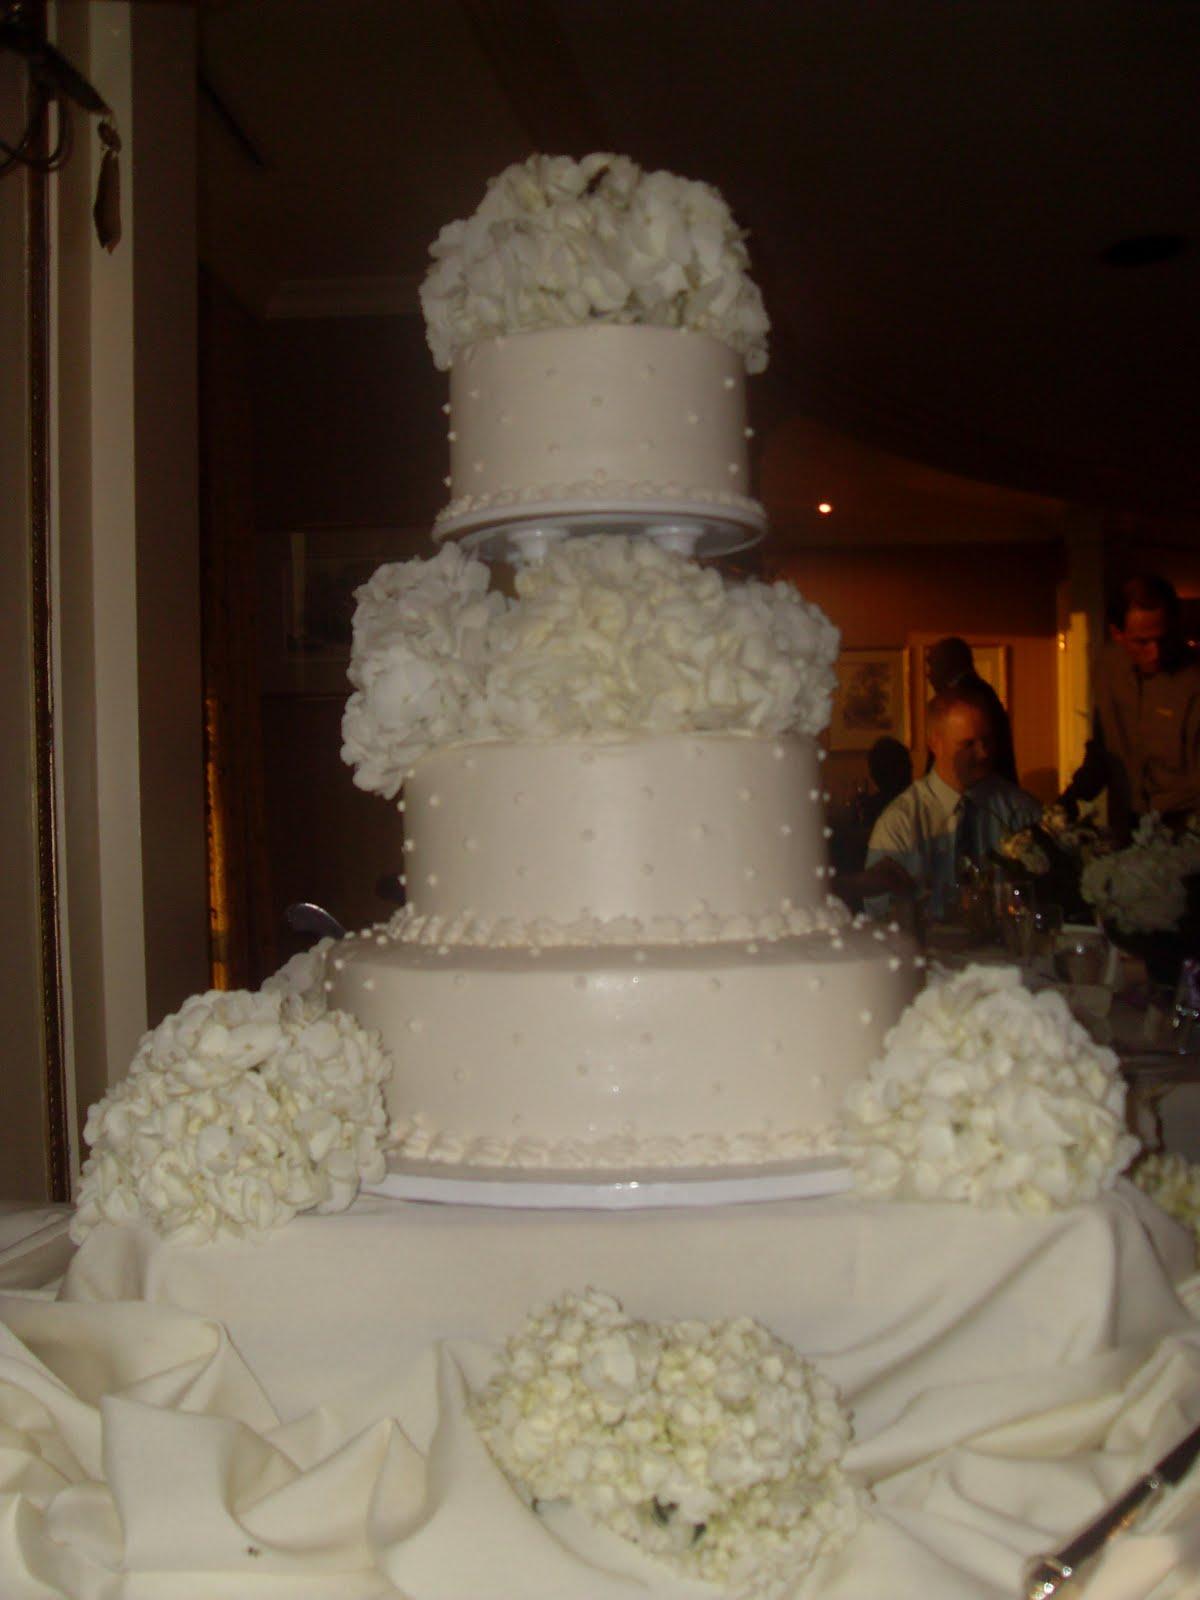 The wedding cake was classic